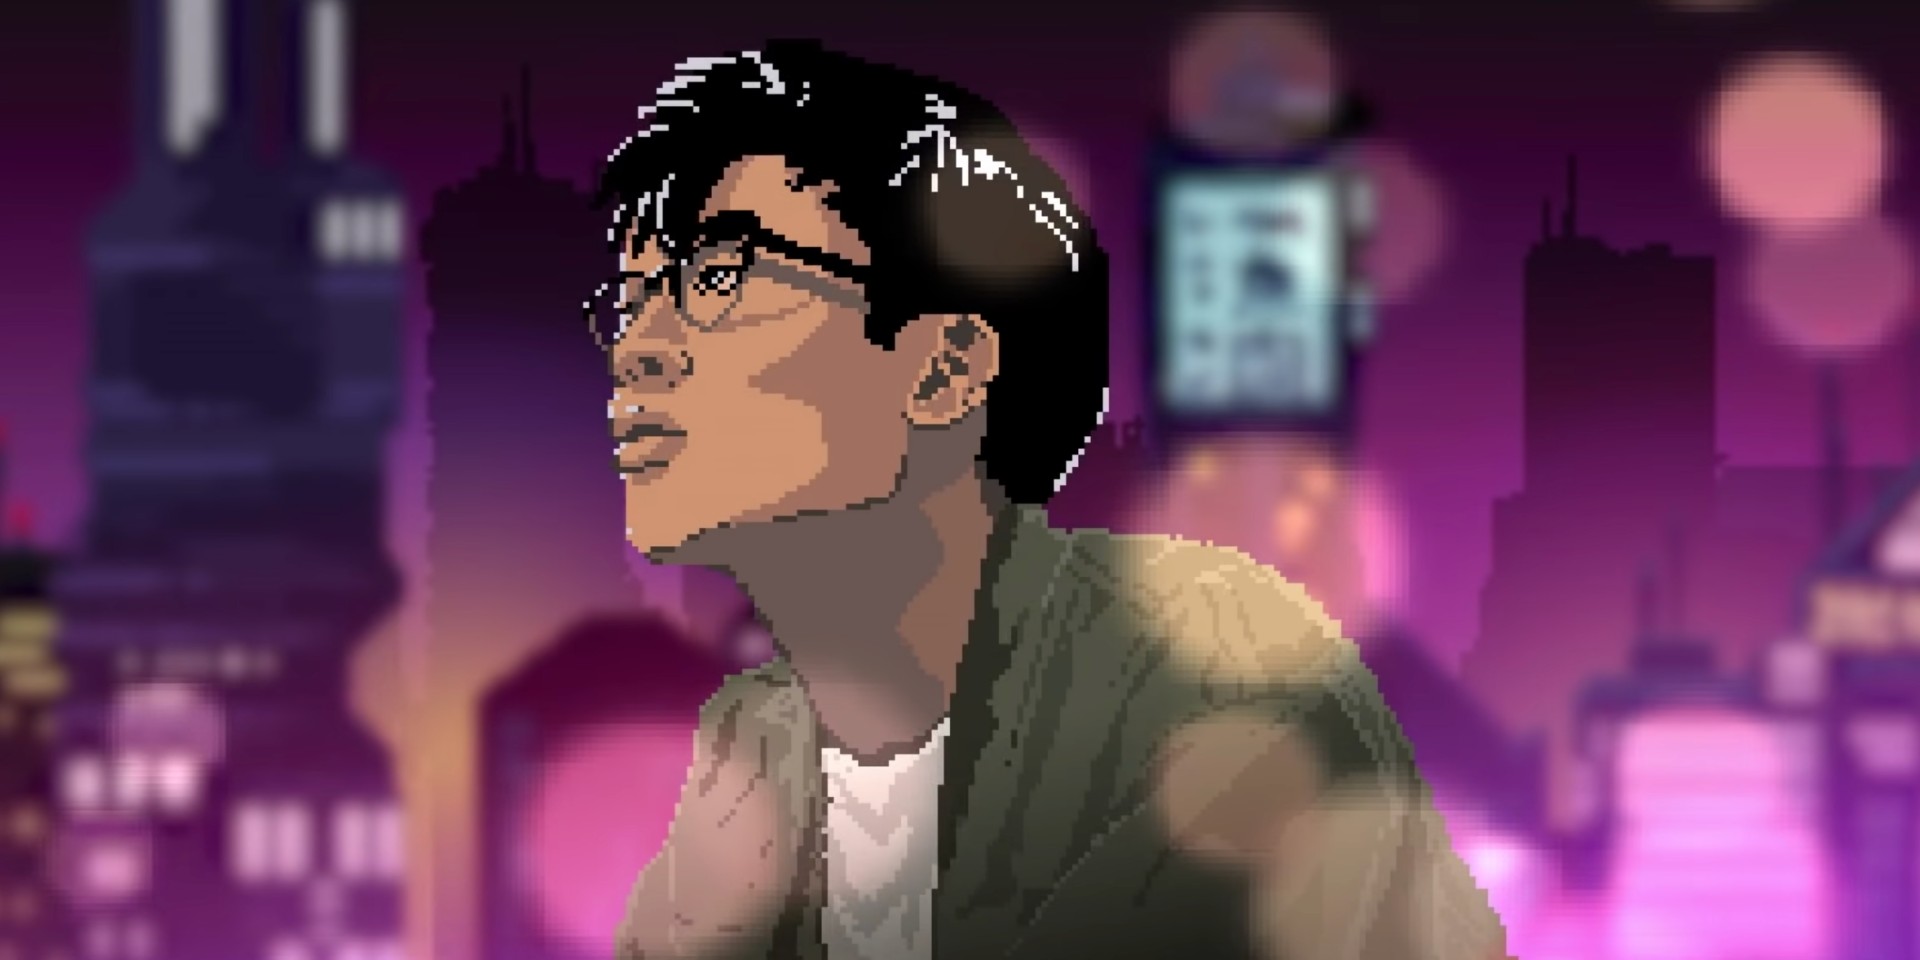 Charlie Lim releases animated new music video for 'Circles' — watch